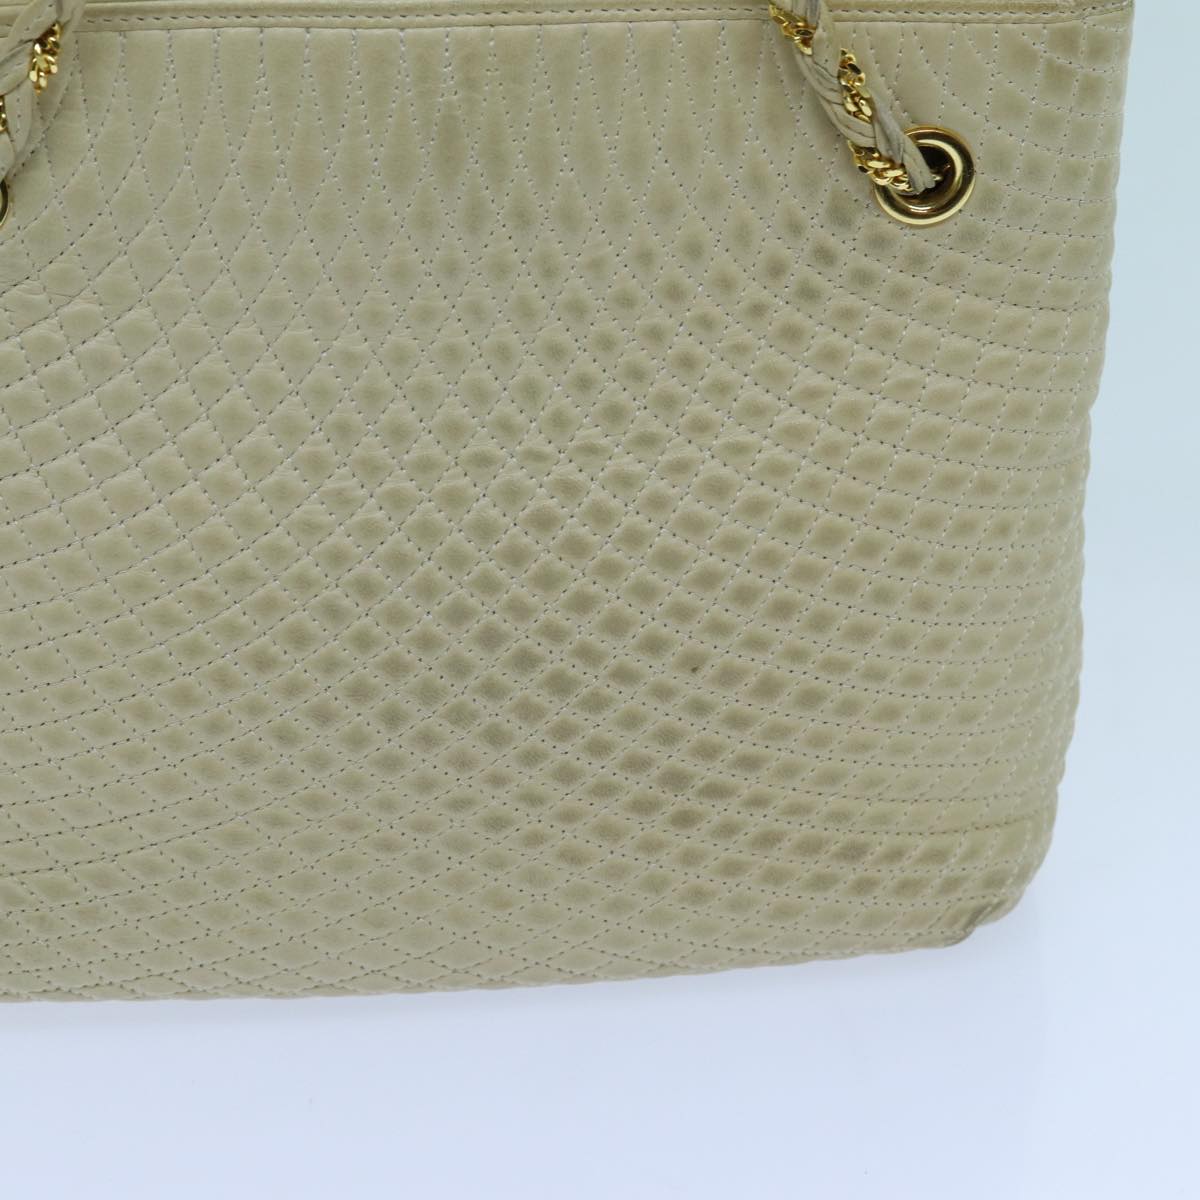 BALLY Quilted Chain Shoulder Bag Leather Beige Auth ac2905